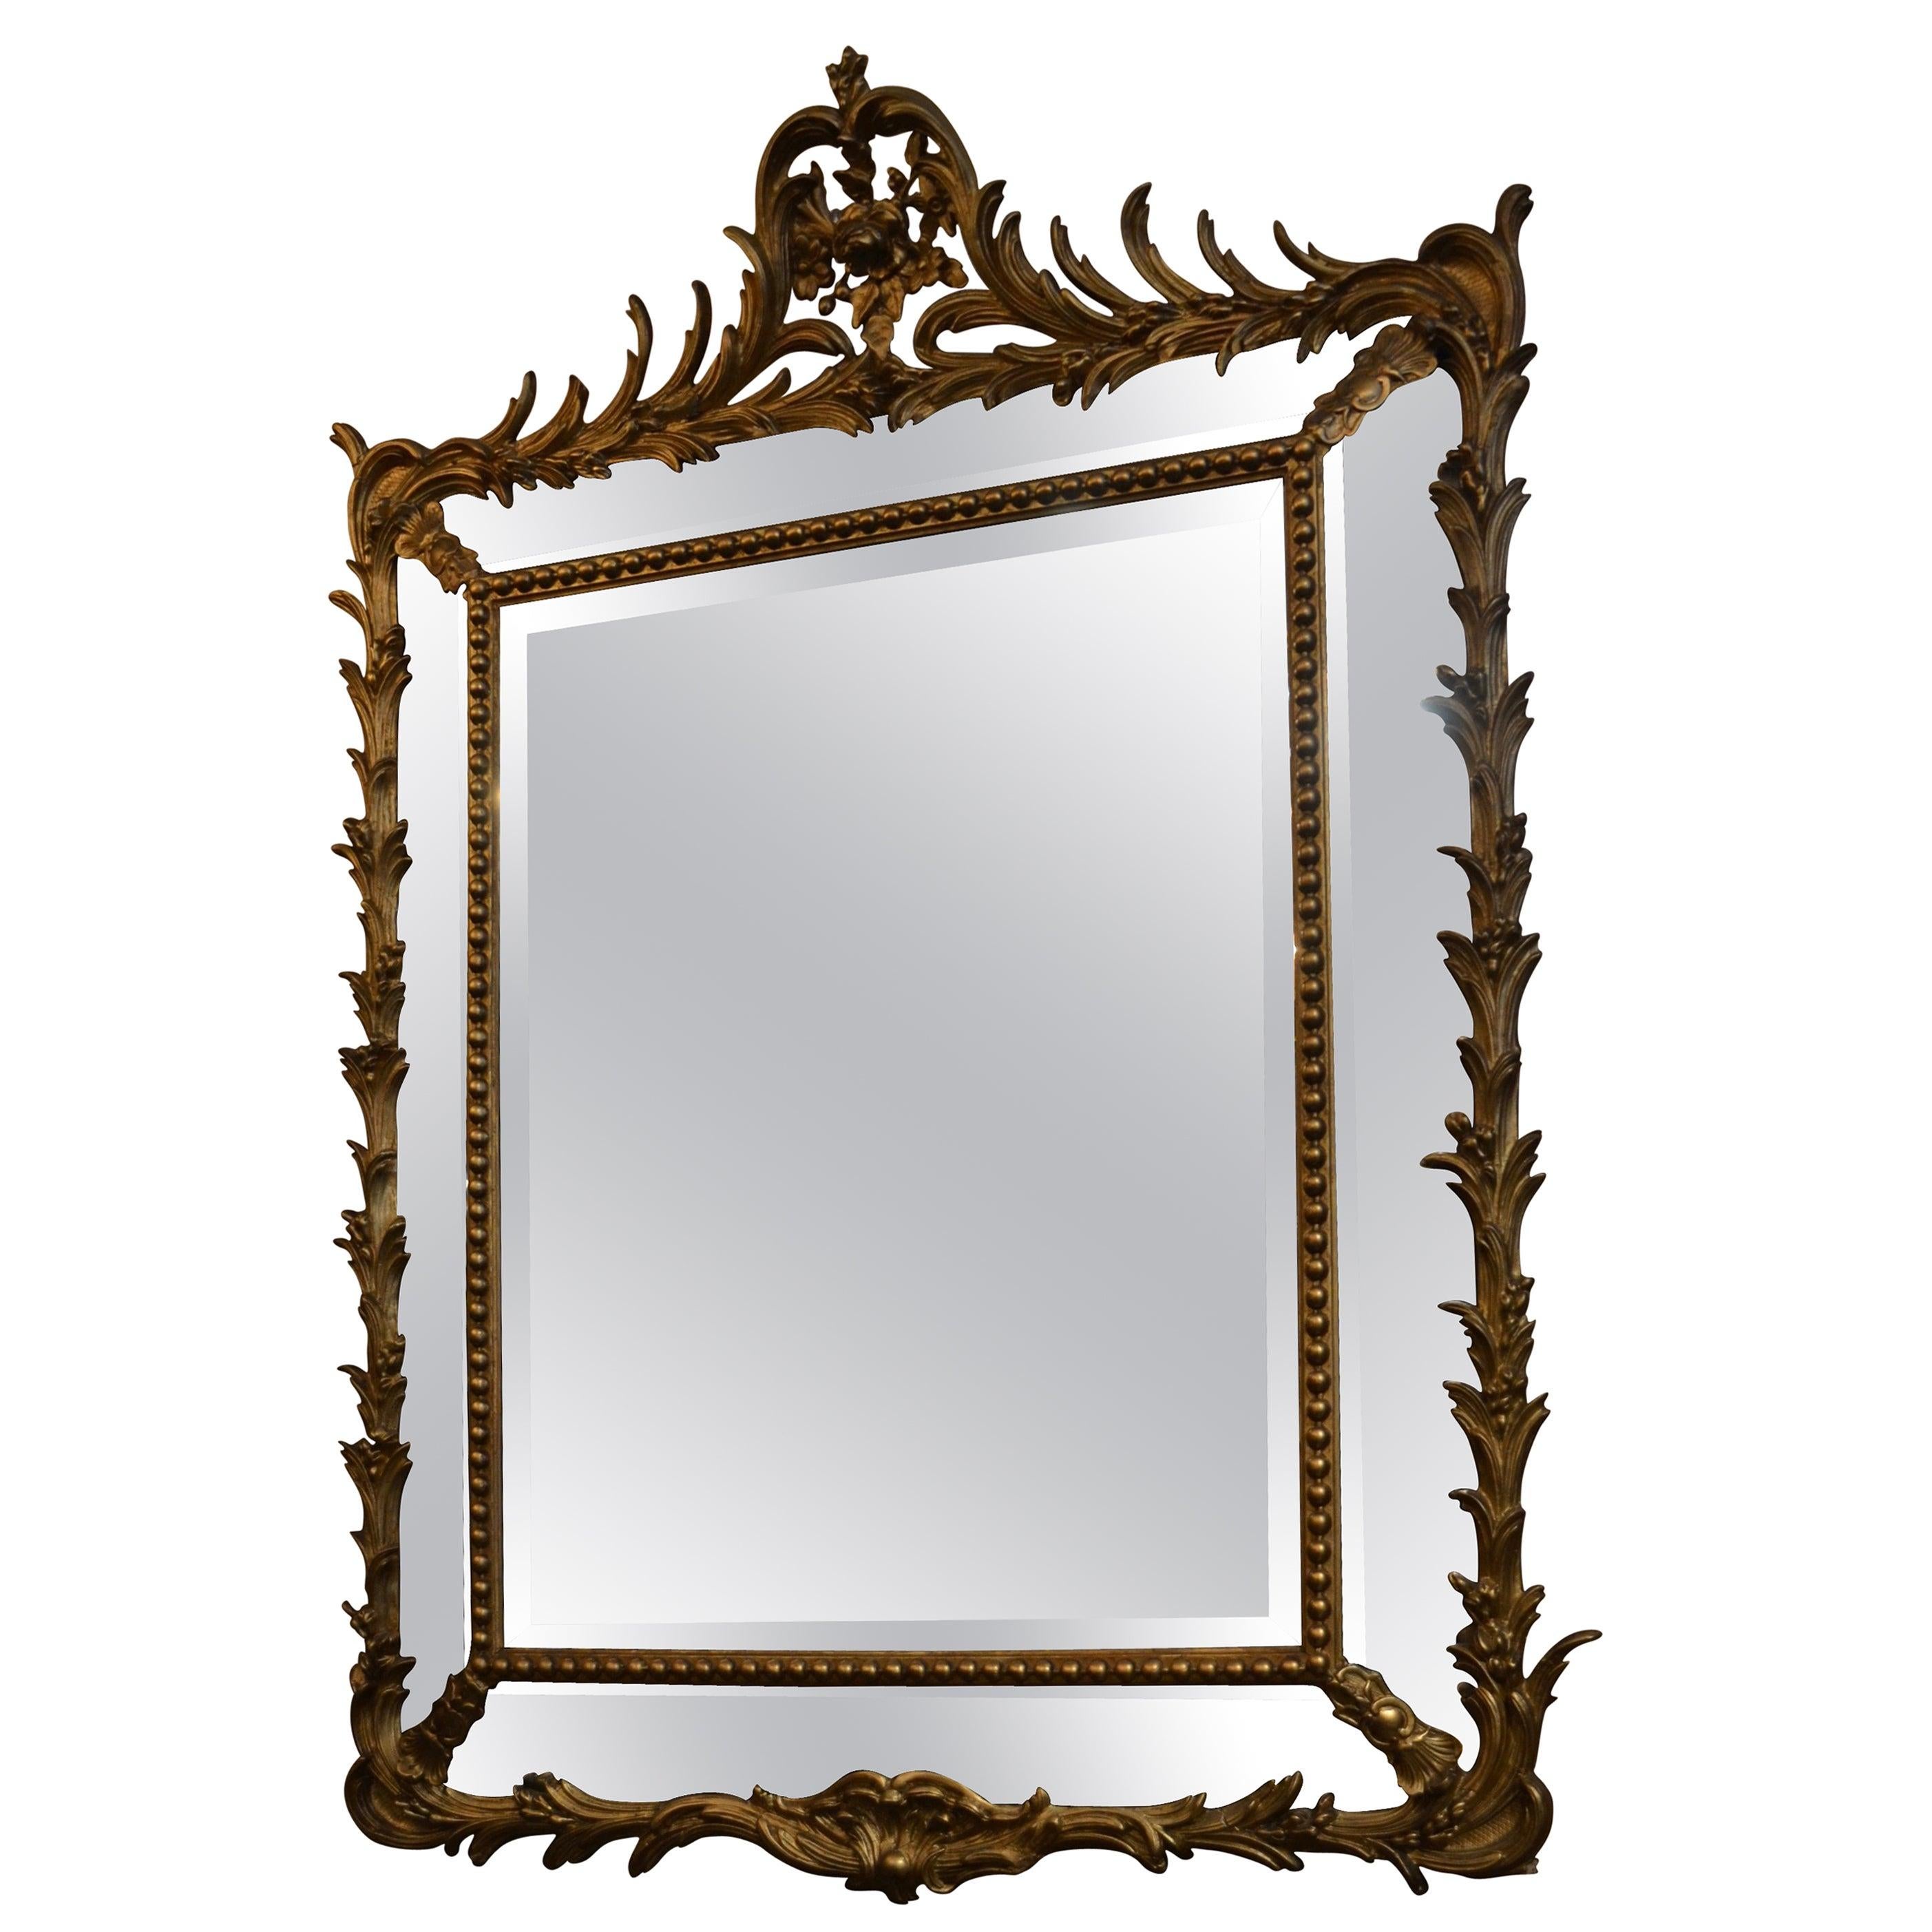 Antique 19th Century French Gold Wood Double Paneled Beveled Mirror, circa 1890 For Sale 1